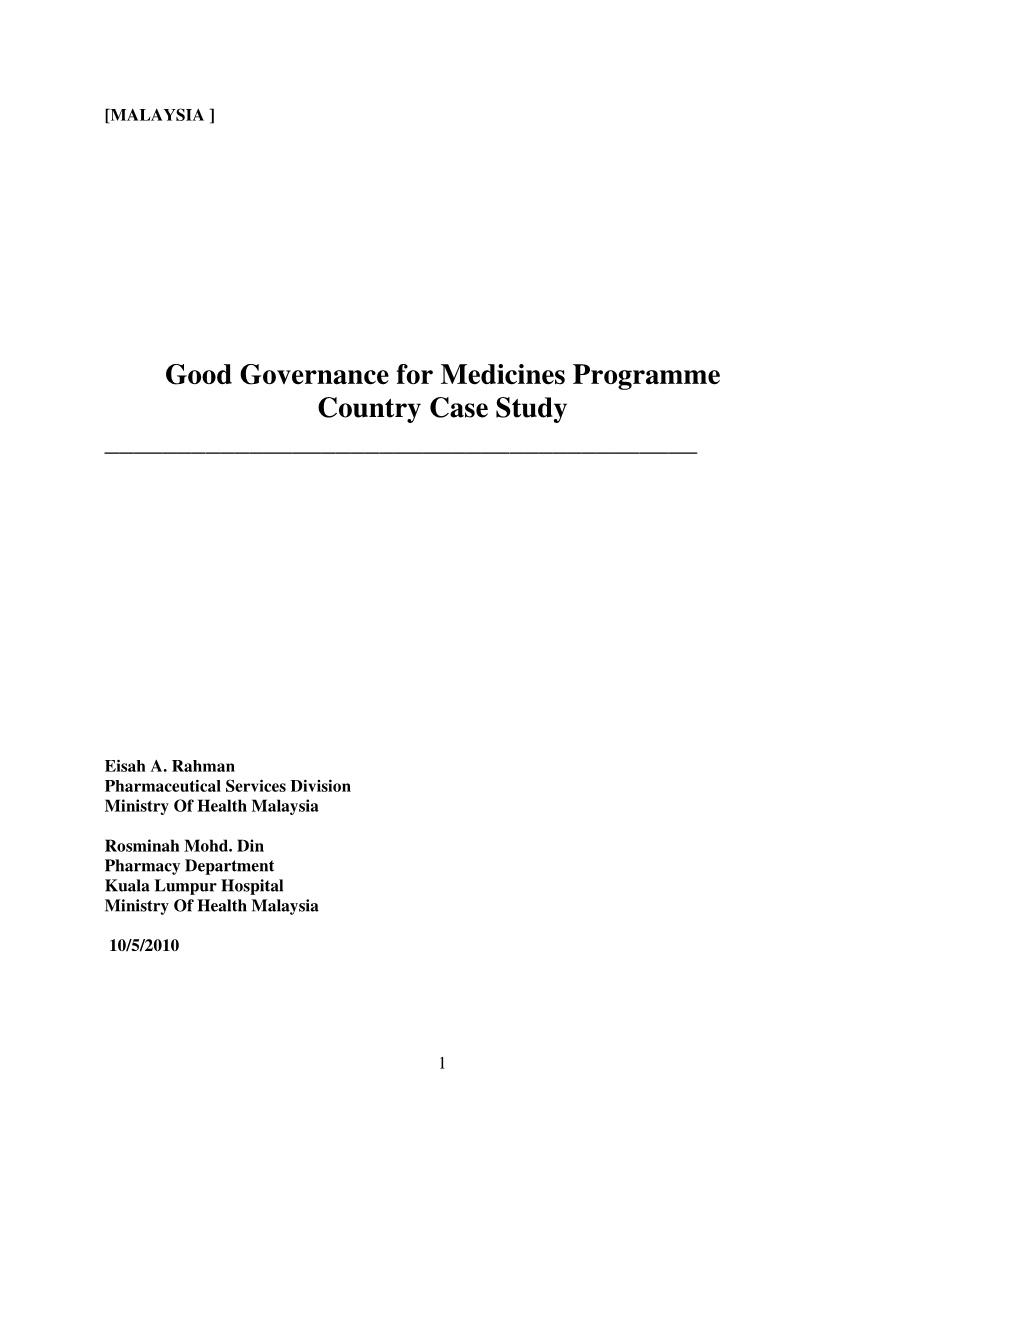 Good Governance for Medicines Programme Country Case Study ______